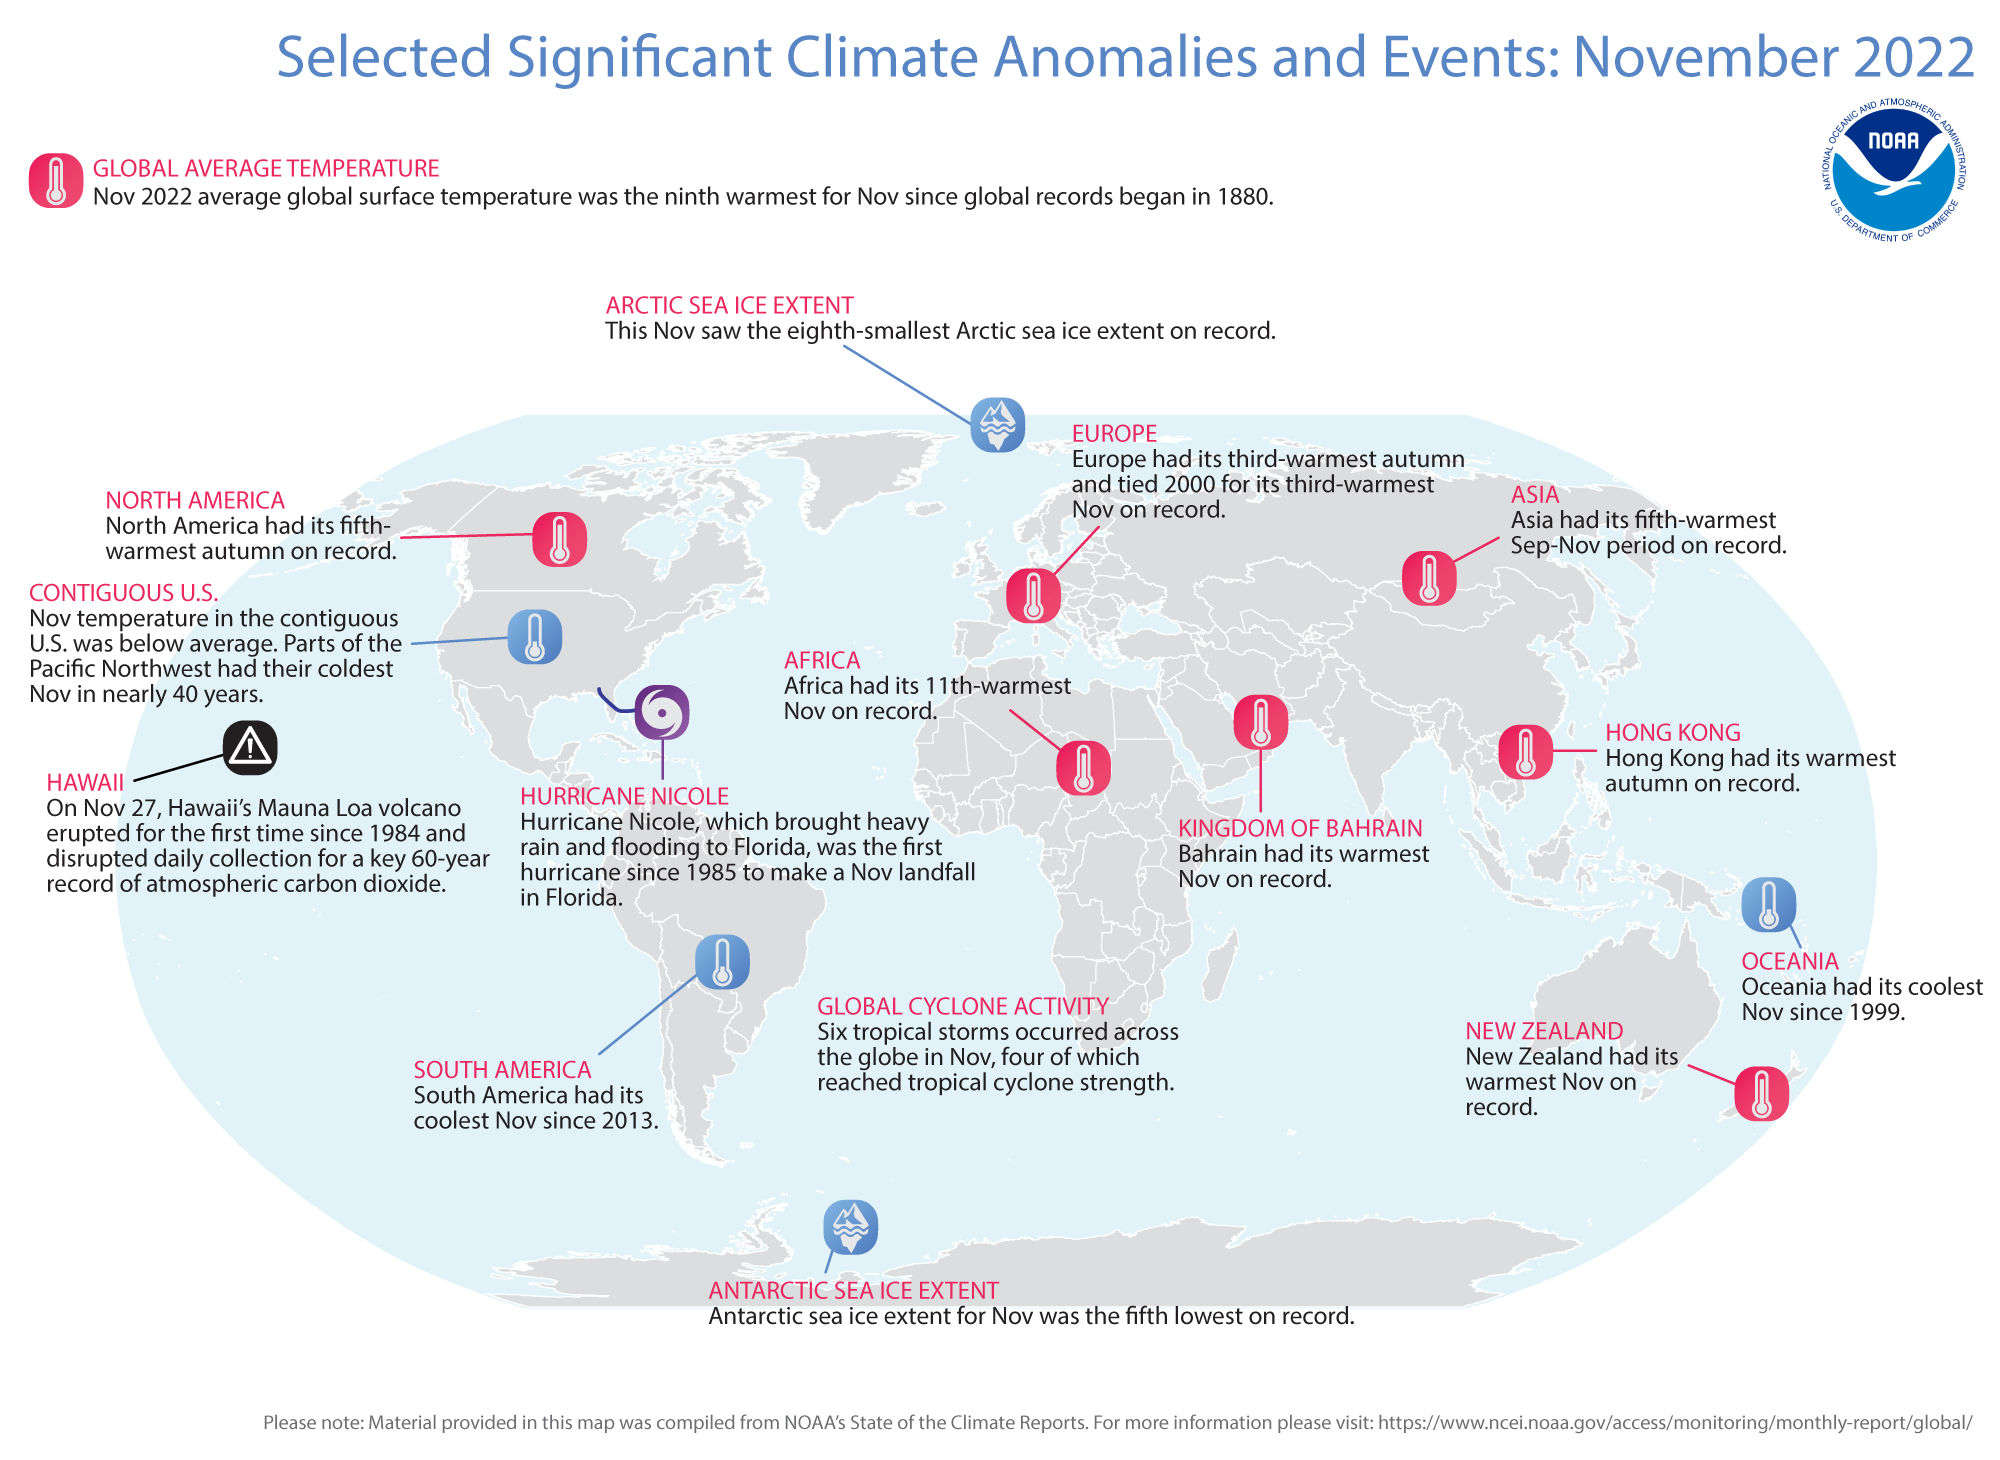 A map of the world plotted with some of the most significant climate events that occurred during November 2022. 